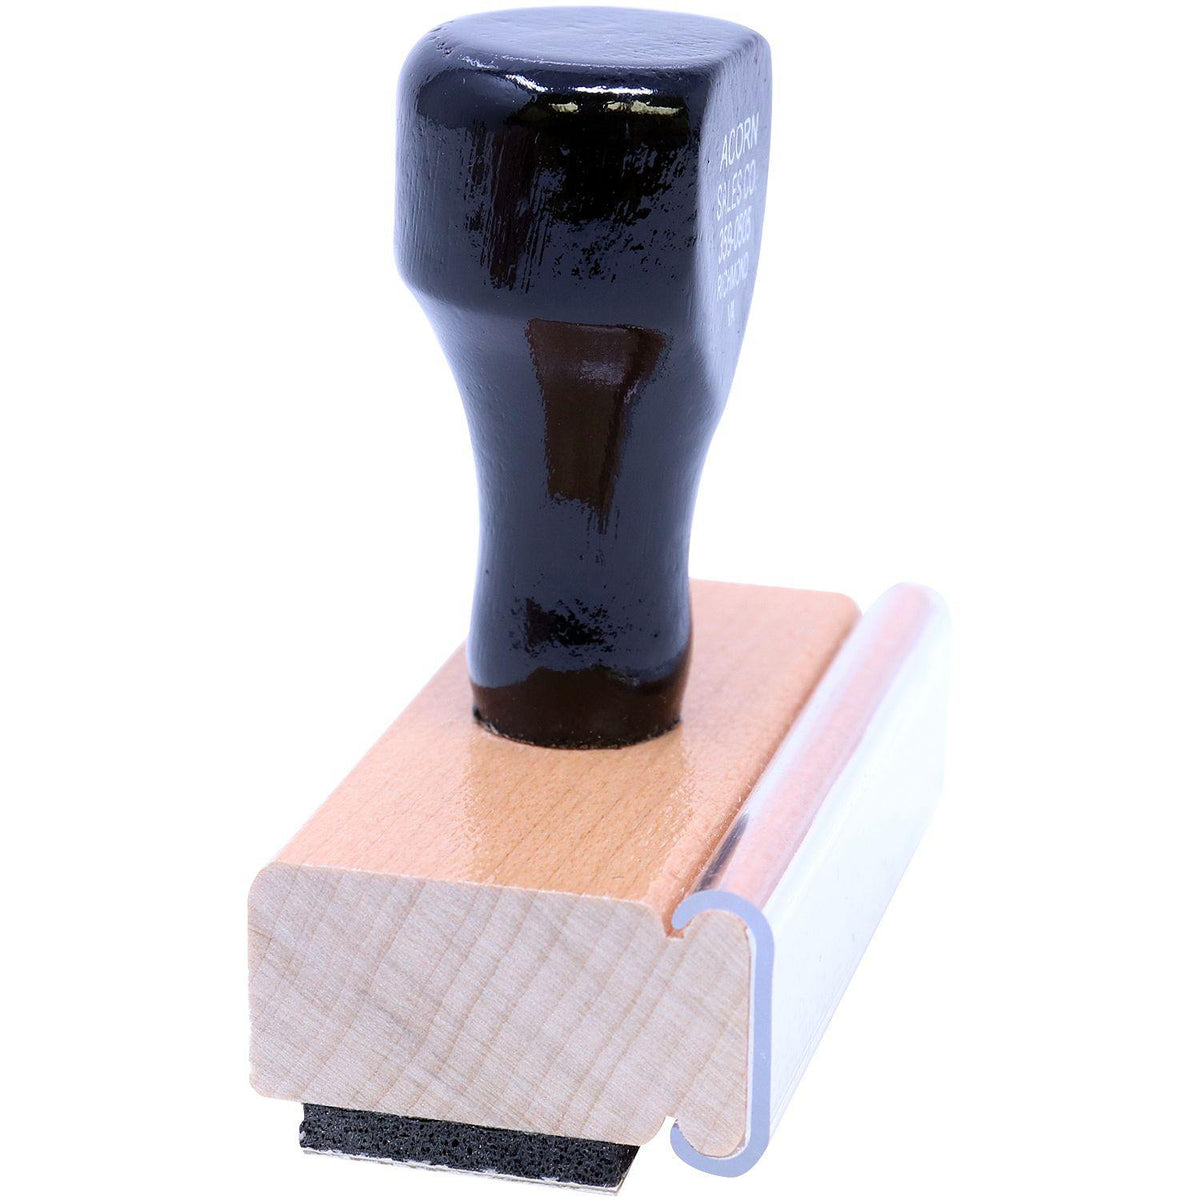 Side View of Large Discharge Rubber Stamp at an Angle